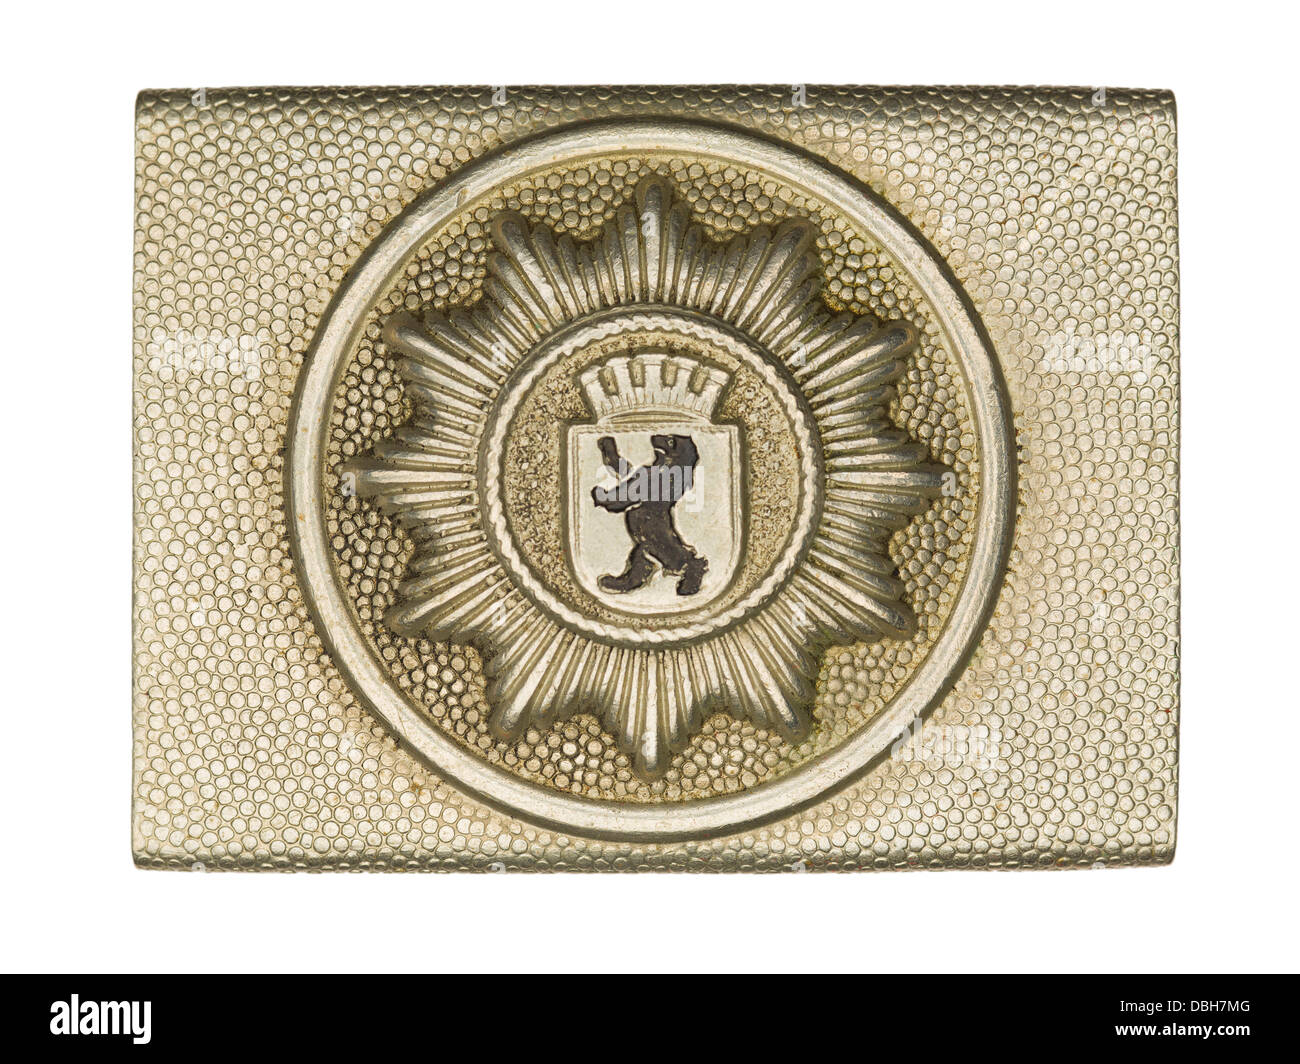 army belt buckle with lion sign Stock Photo